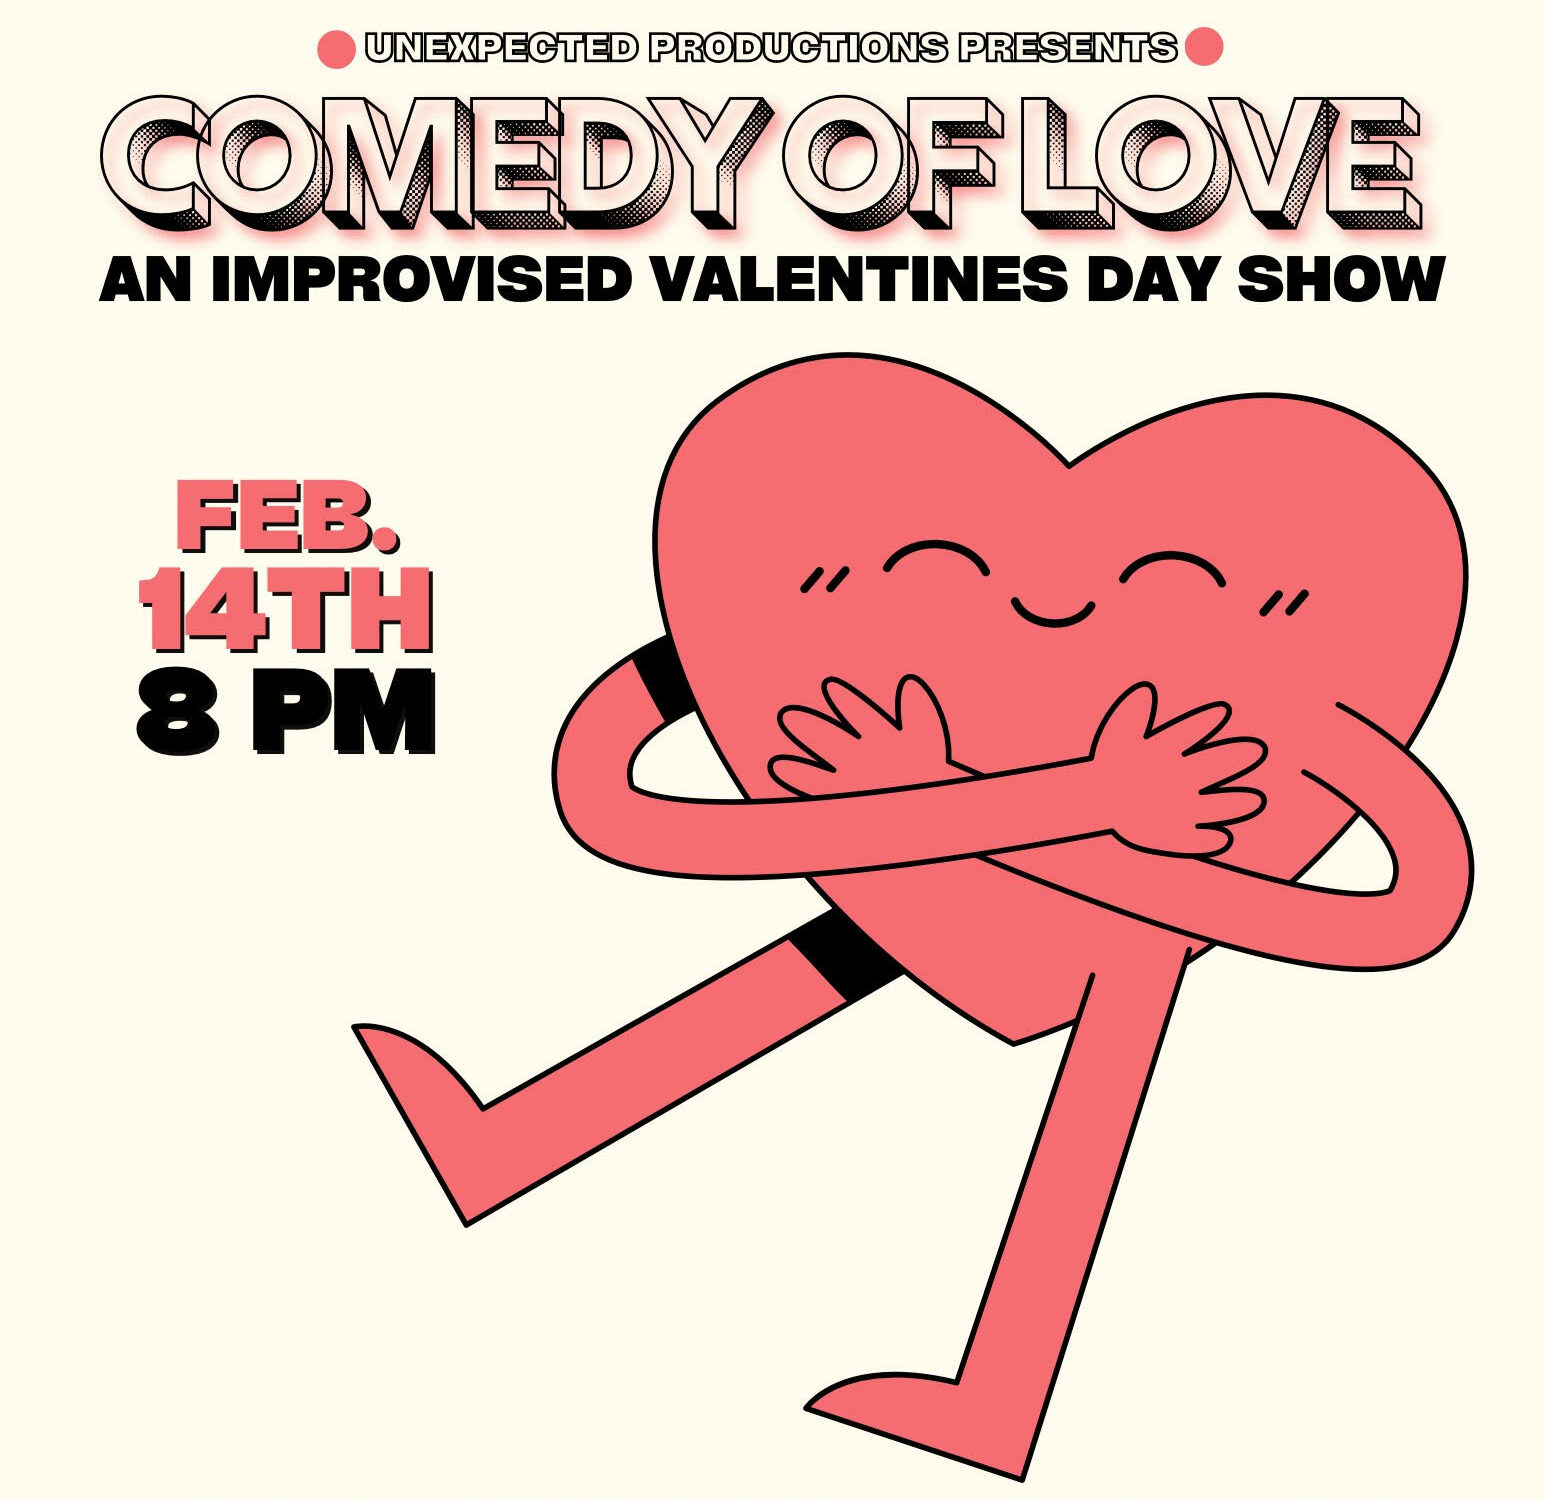 Comedy of love flyer for unexpected productions in seattle